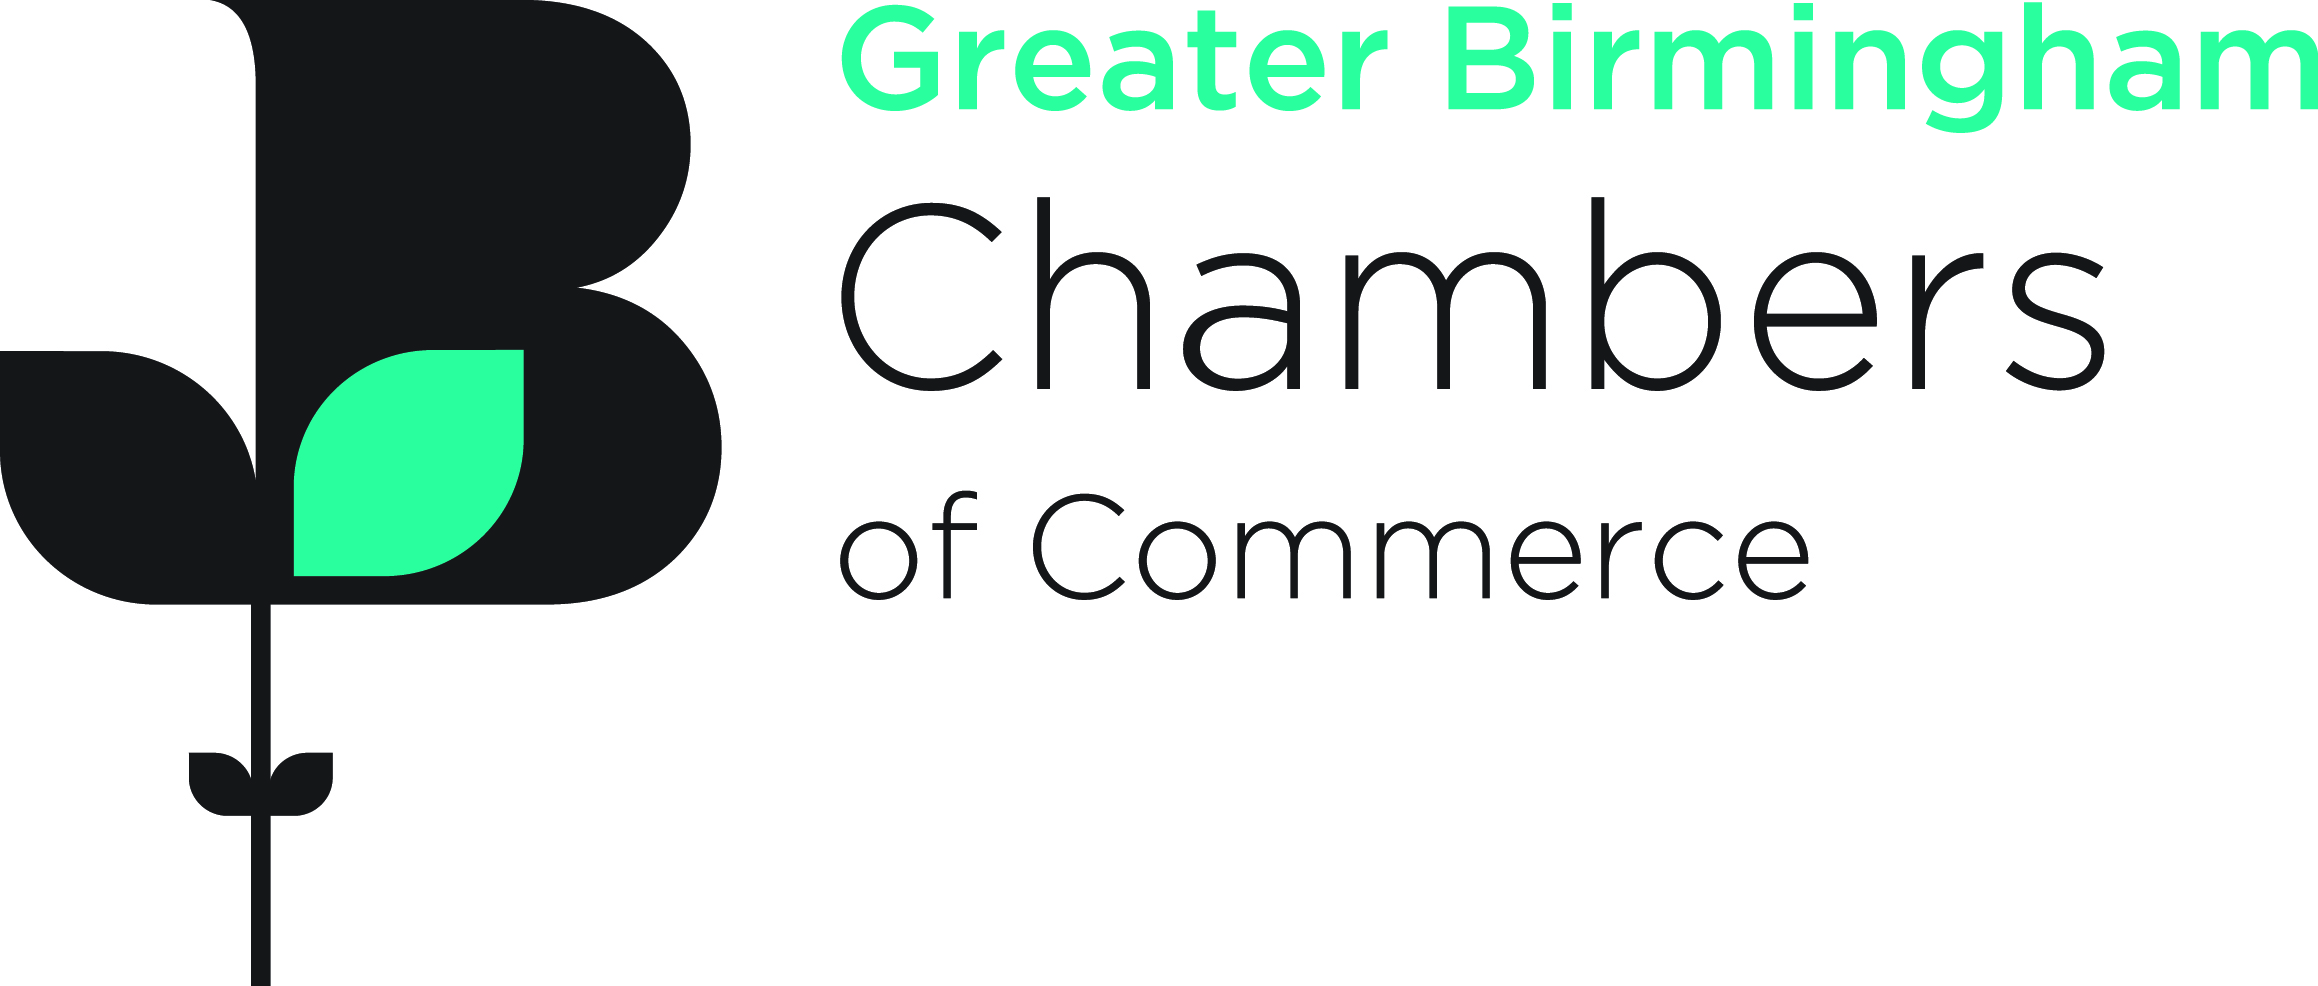 Great Birmingham Chambers of Commerce & Industry